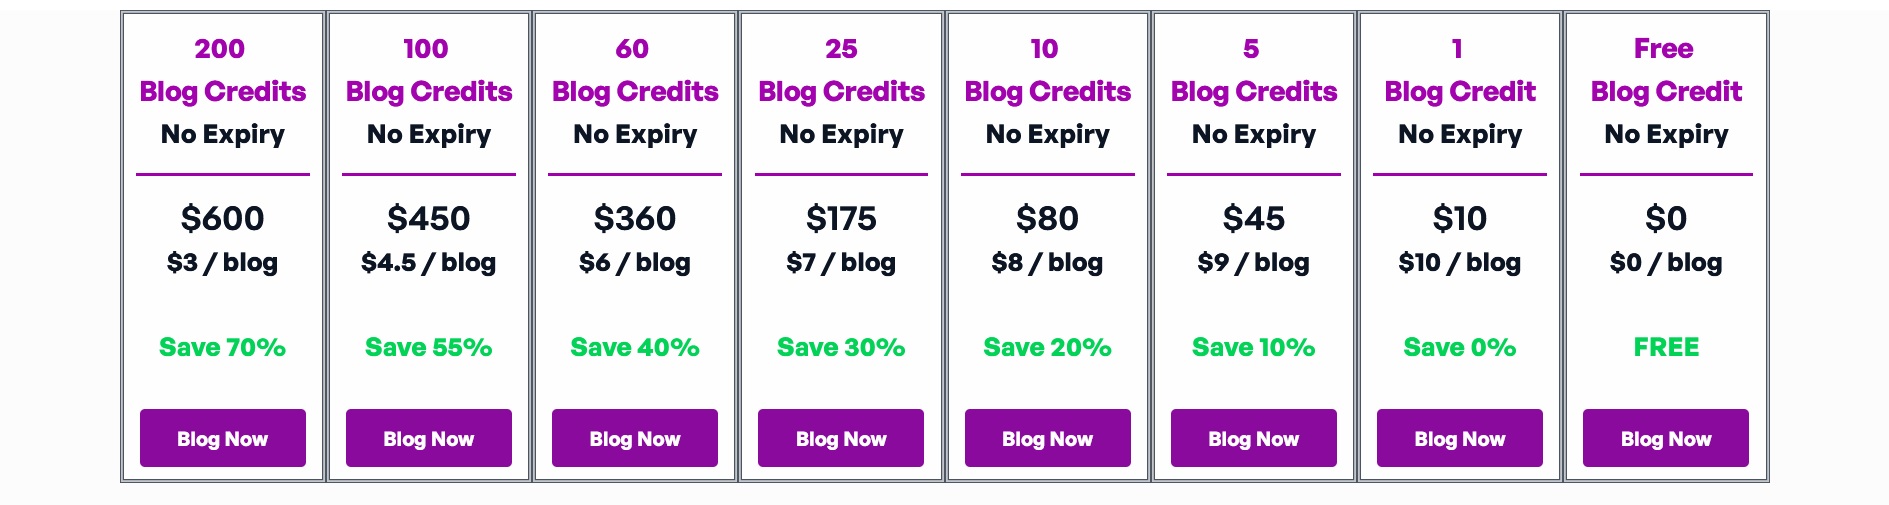 BlogAssistant_pricing